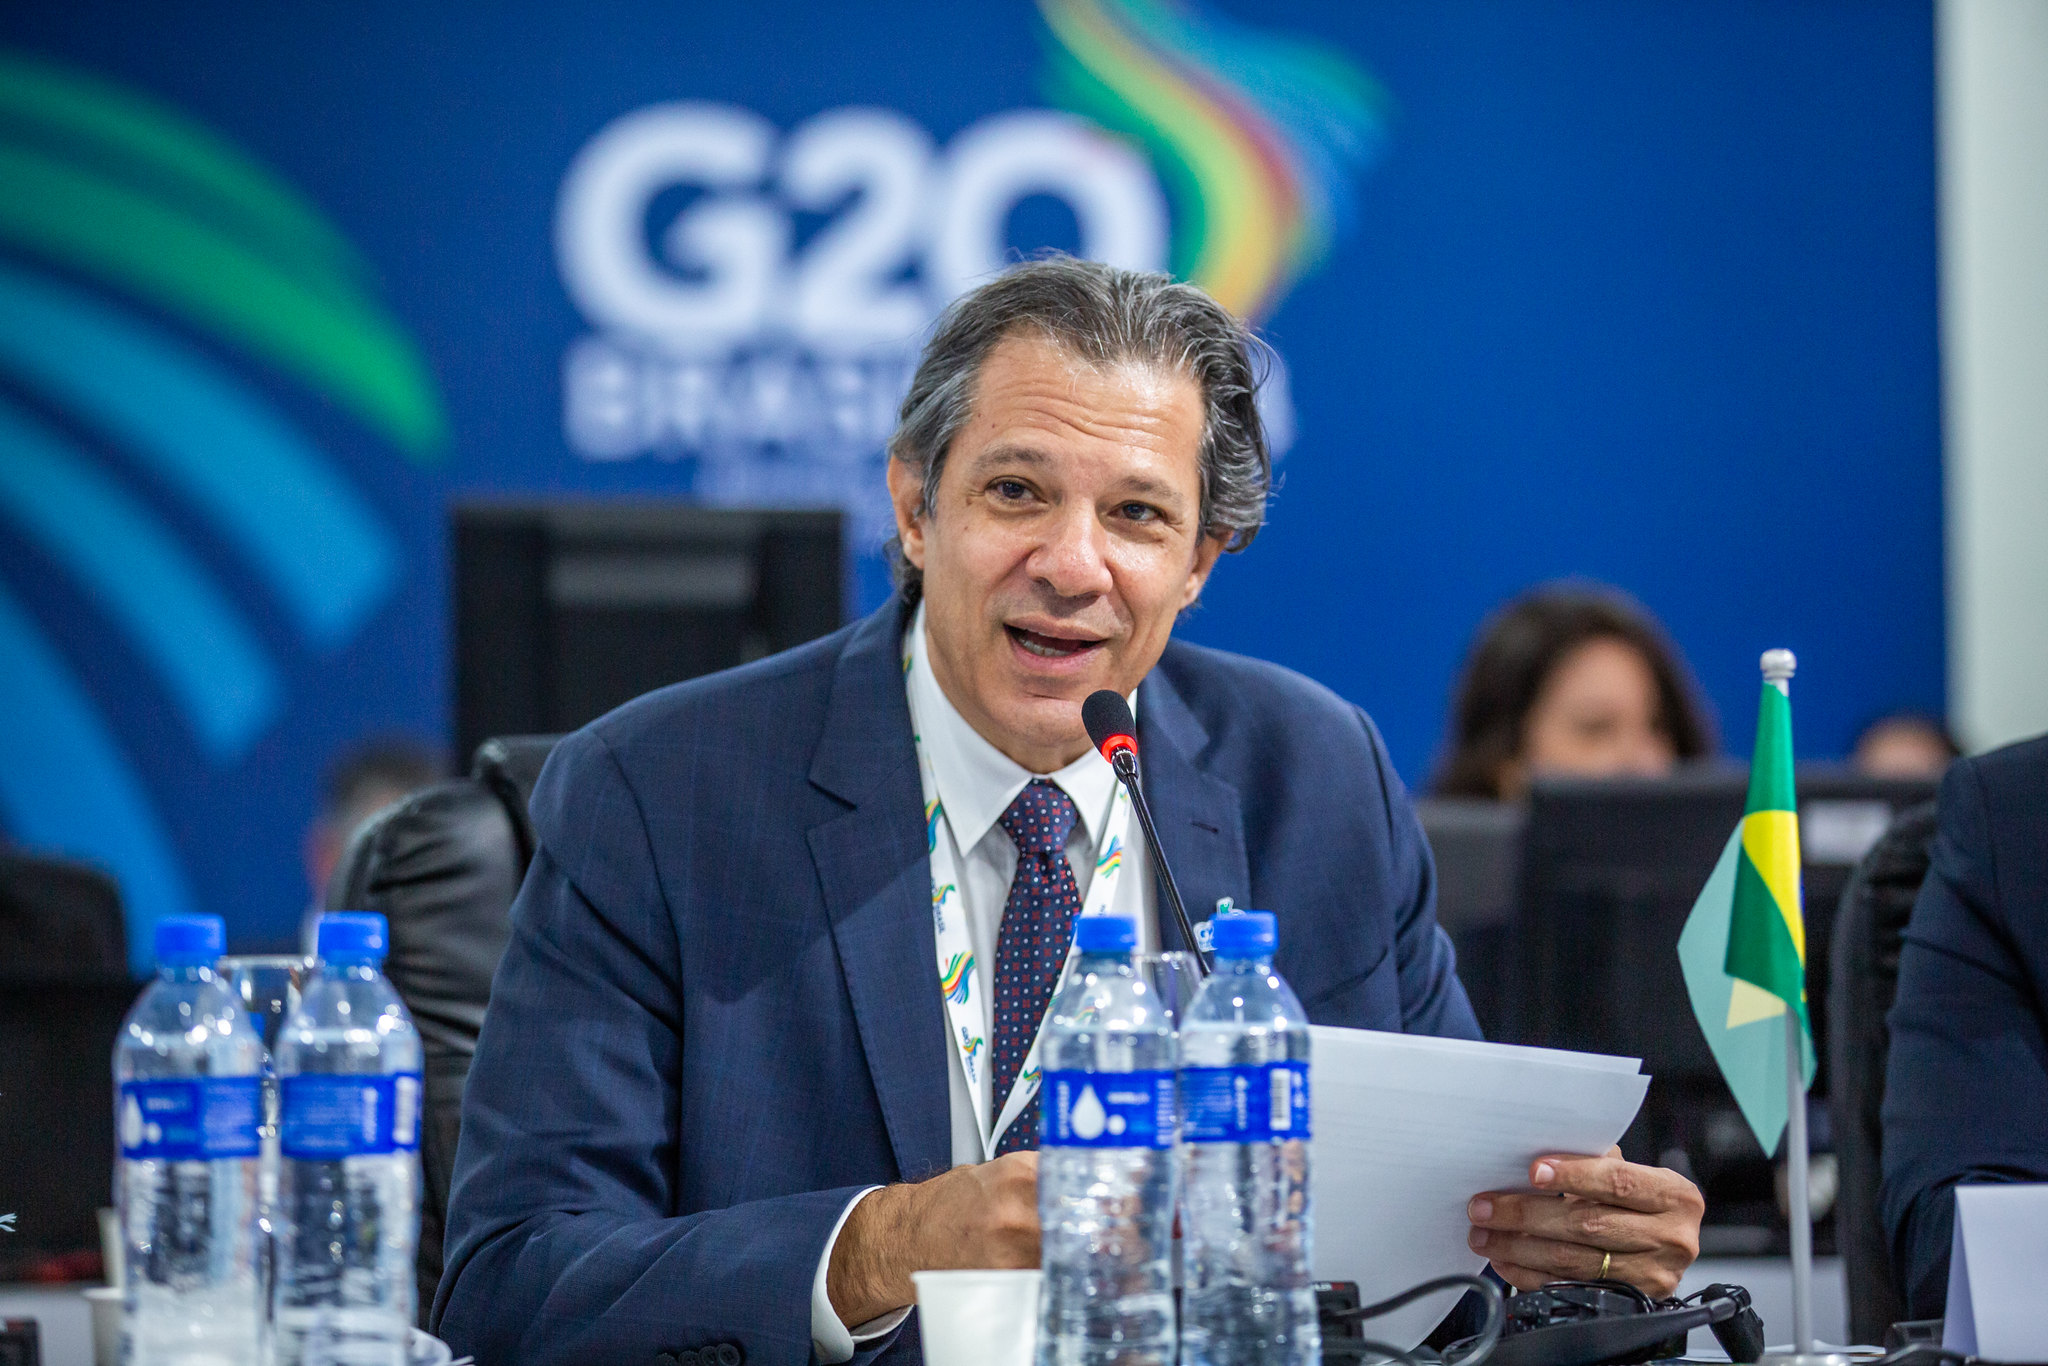 In his speech at the opening of the second day of the G20 Finance Ministers' meeting, the Finance Minister of Brasil advocates for the super-rich to pay taxes proportional to their wealth. Credit Diogo Zacarias/MF